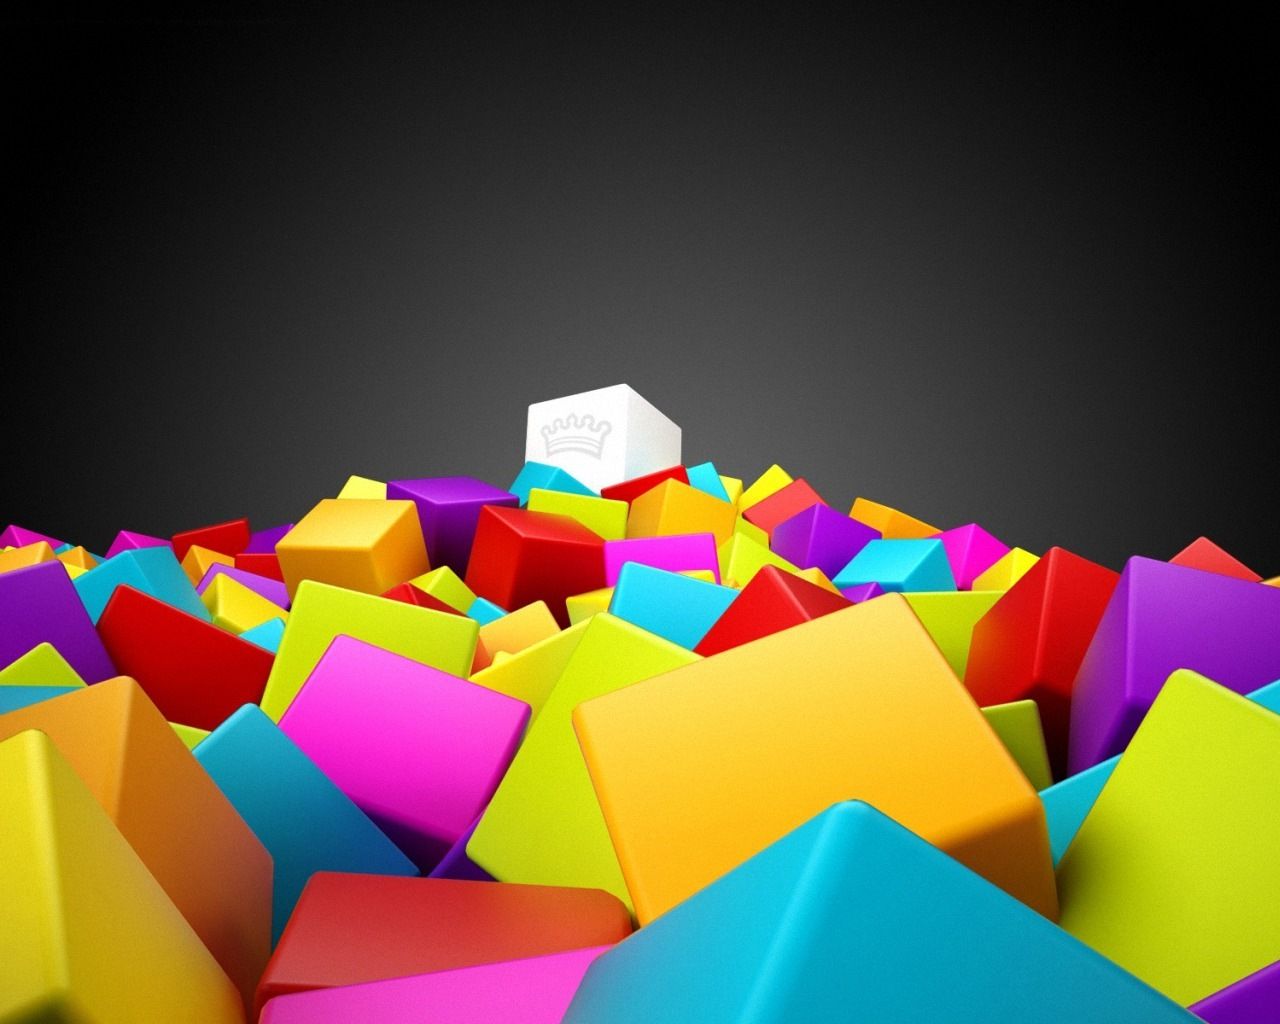 3d Colorful Squares 1280x1024 Wallpapers, 1280x1024 Wallpapers